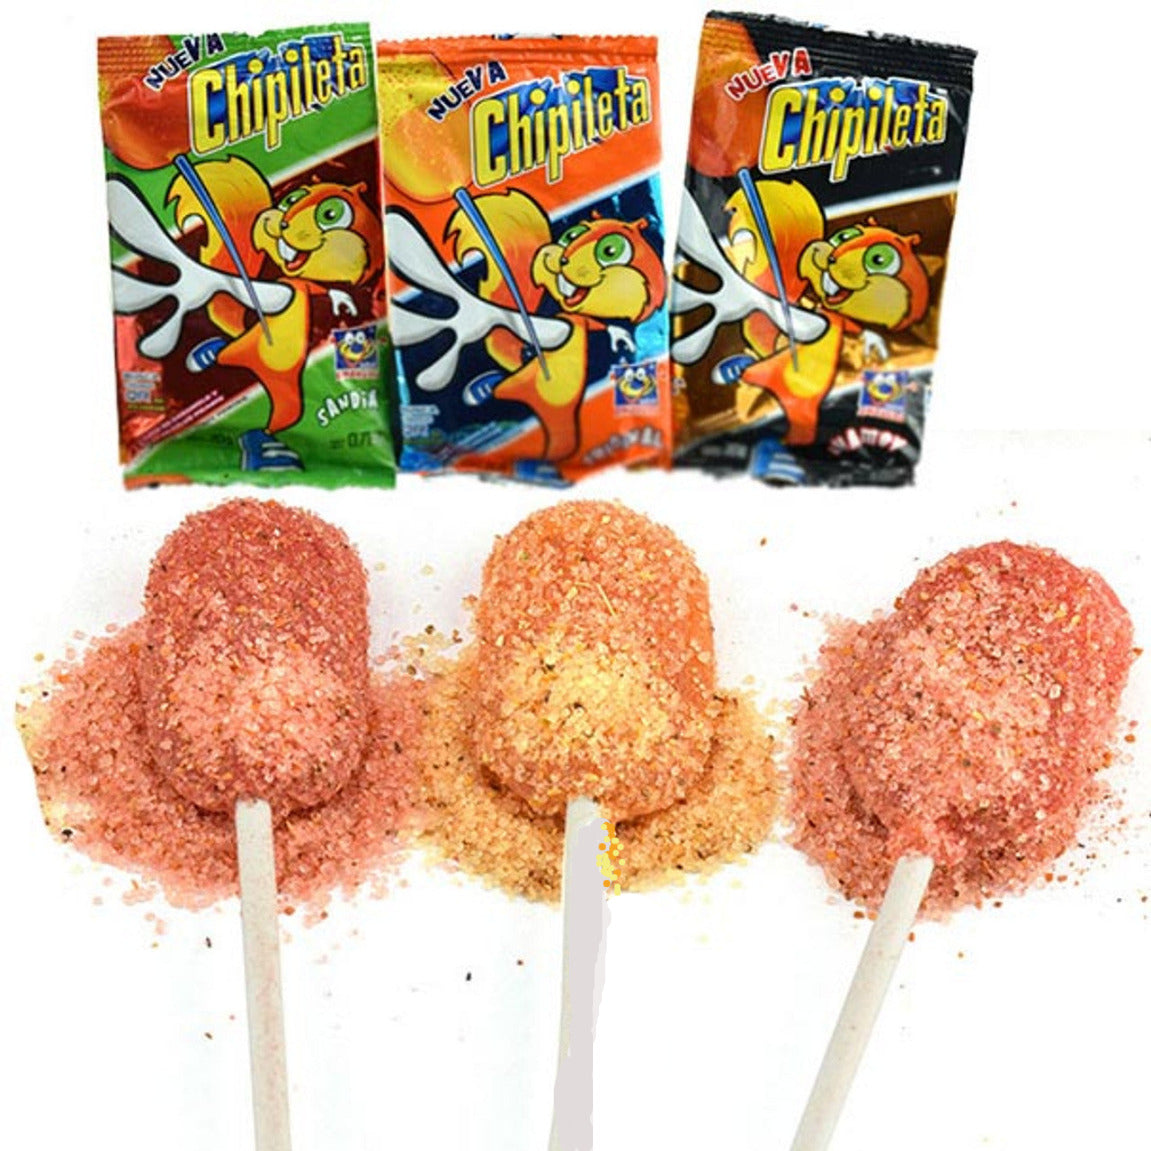 Anahuac Chipileta Mexican Dipping Candy Lollipop